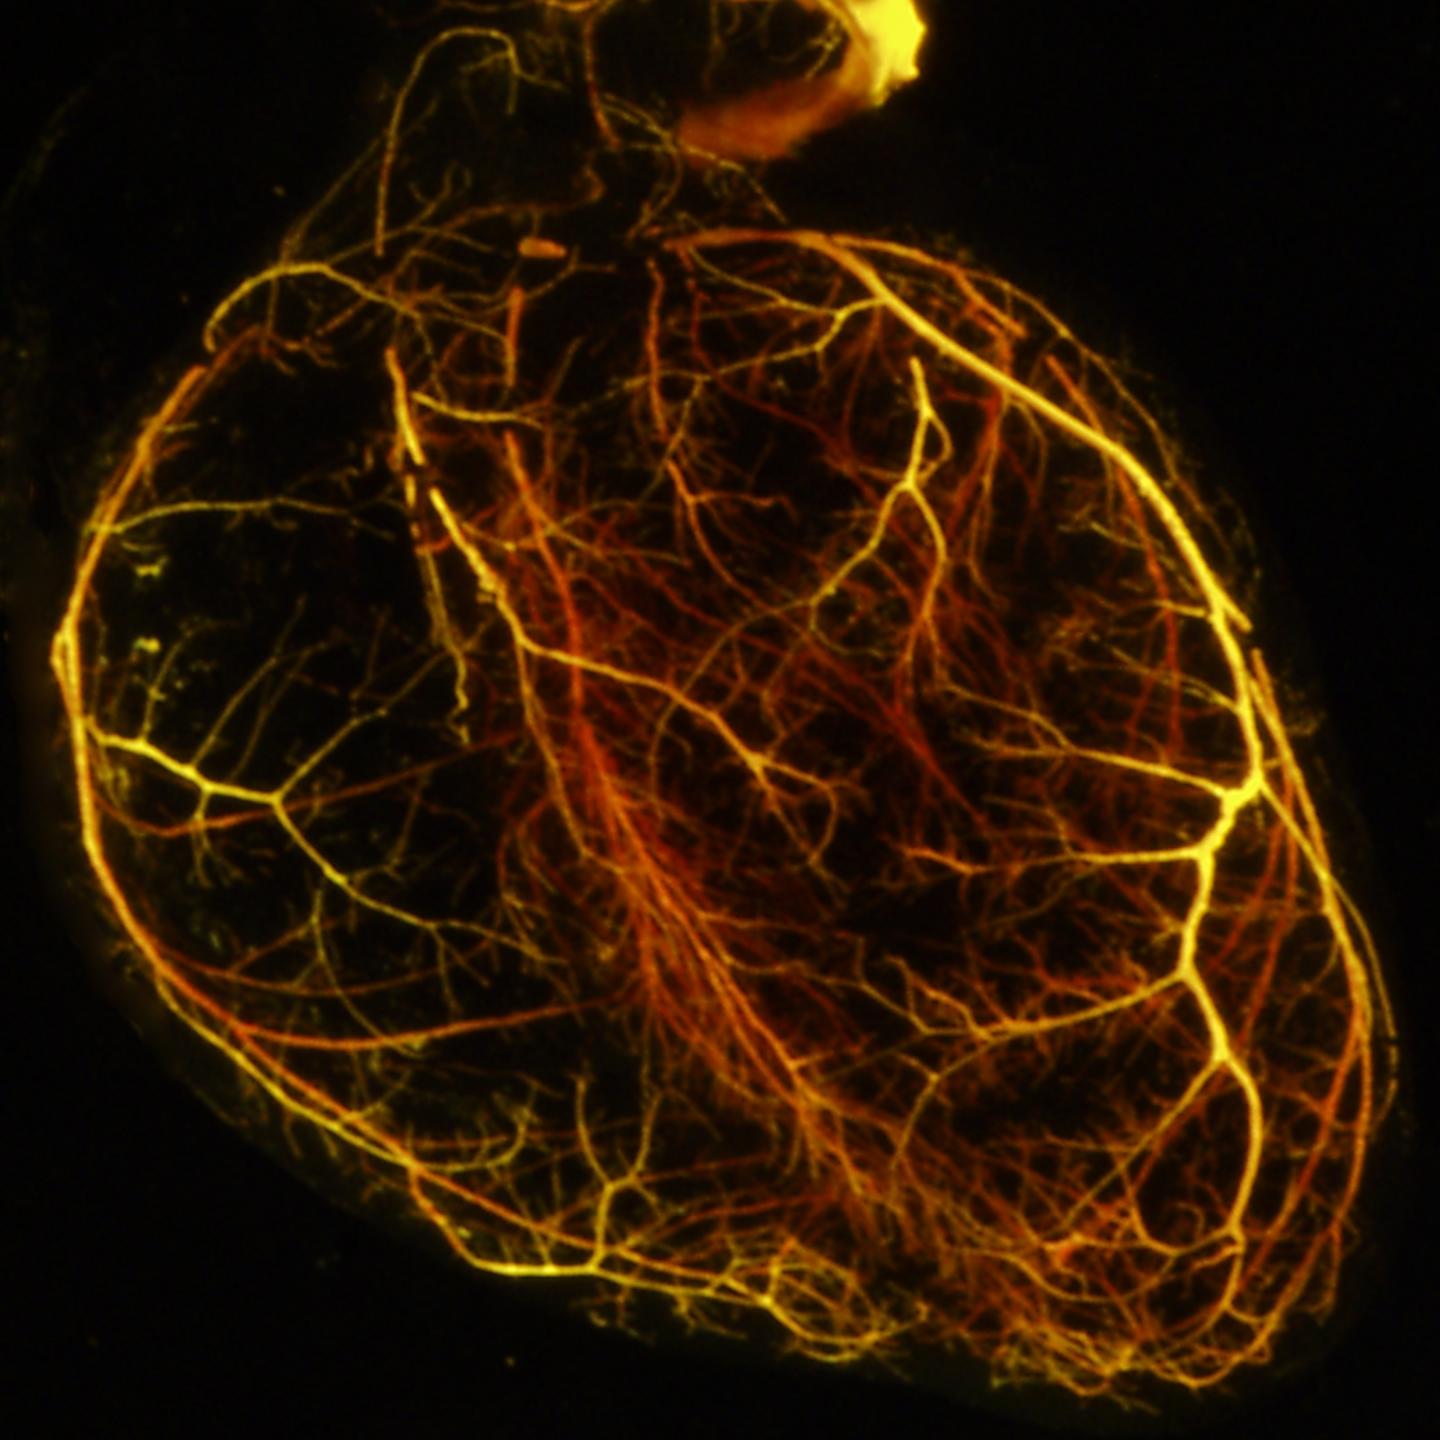 An outline of a mouse heart